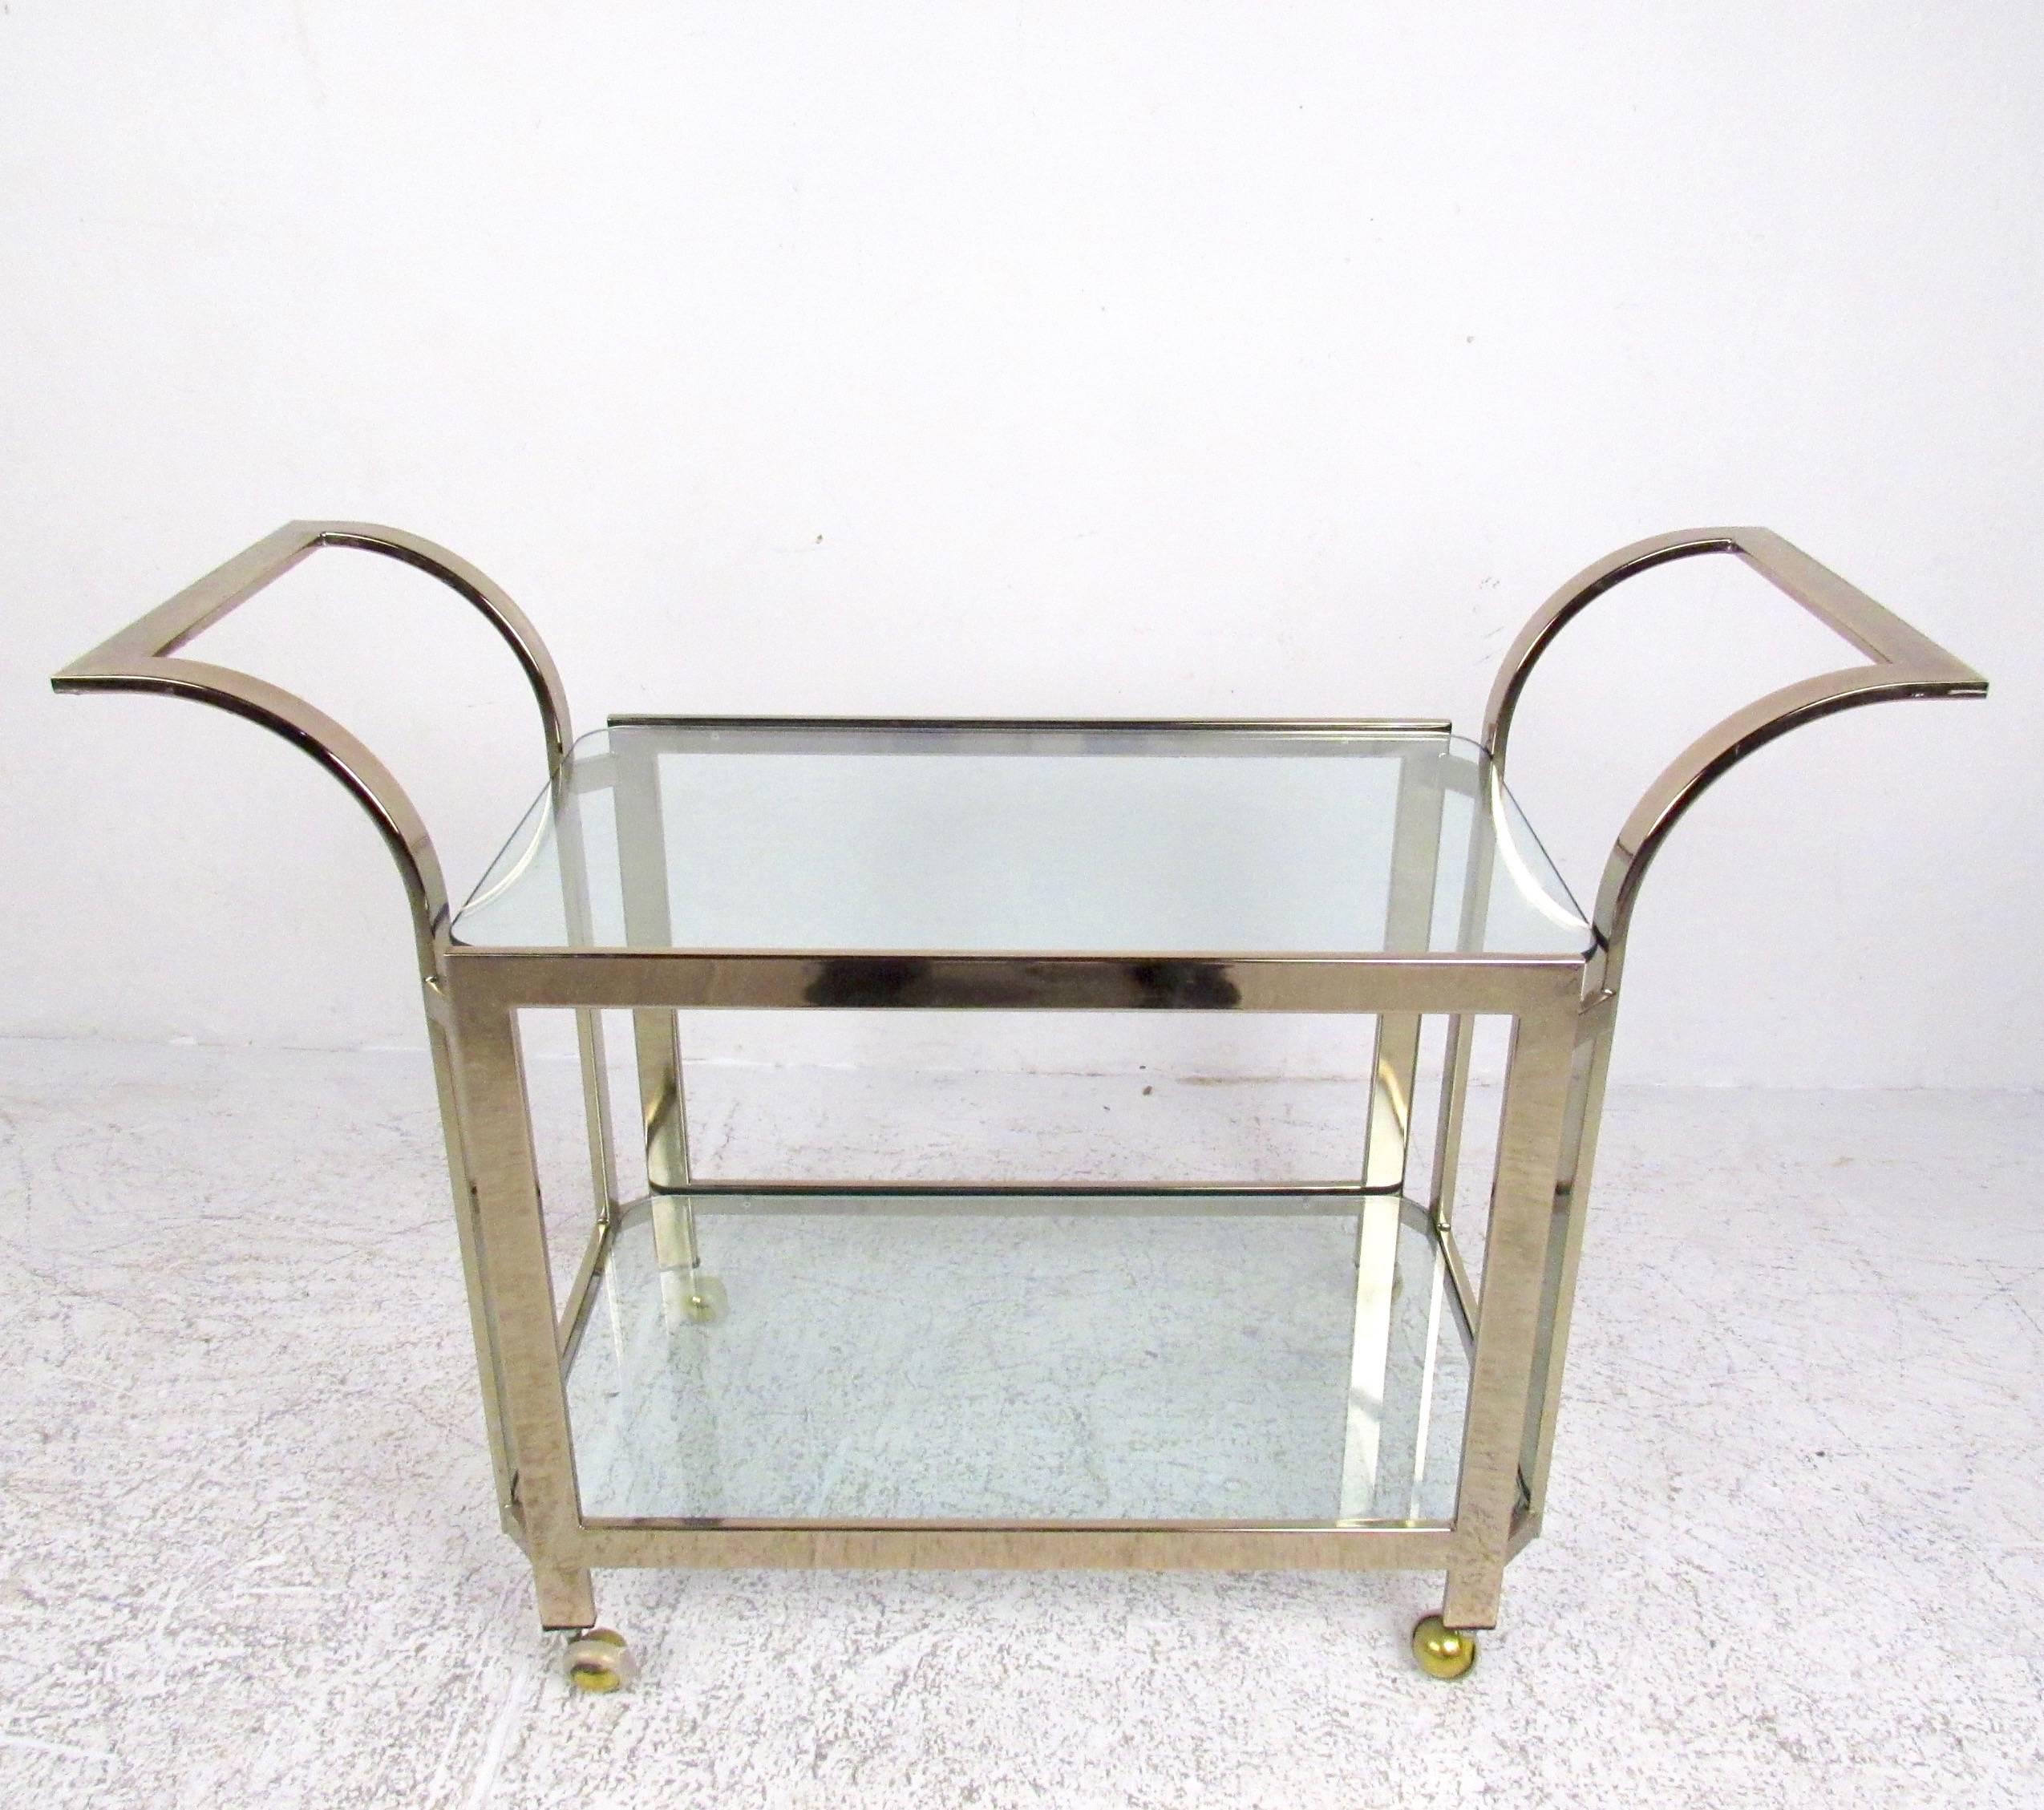 This vintage modern serving cart features two-tiered glass shelves for bottle or glassware storage. An ideal shop display or bar service cart, the shapely modern design and vintage brass finish add to the Mid-Century Modern appeal of this versatile